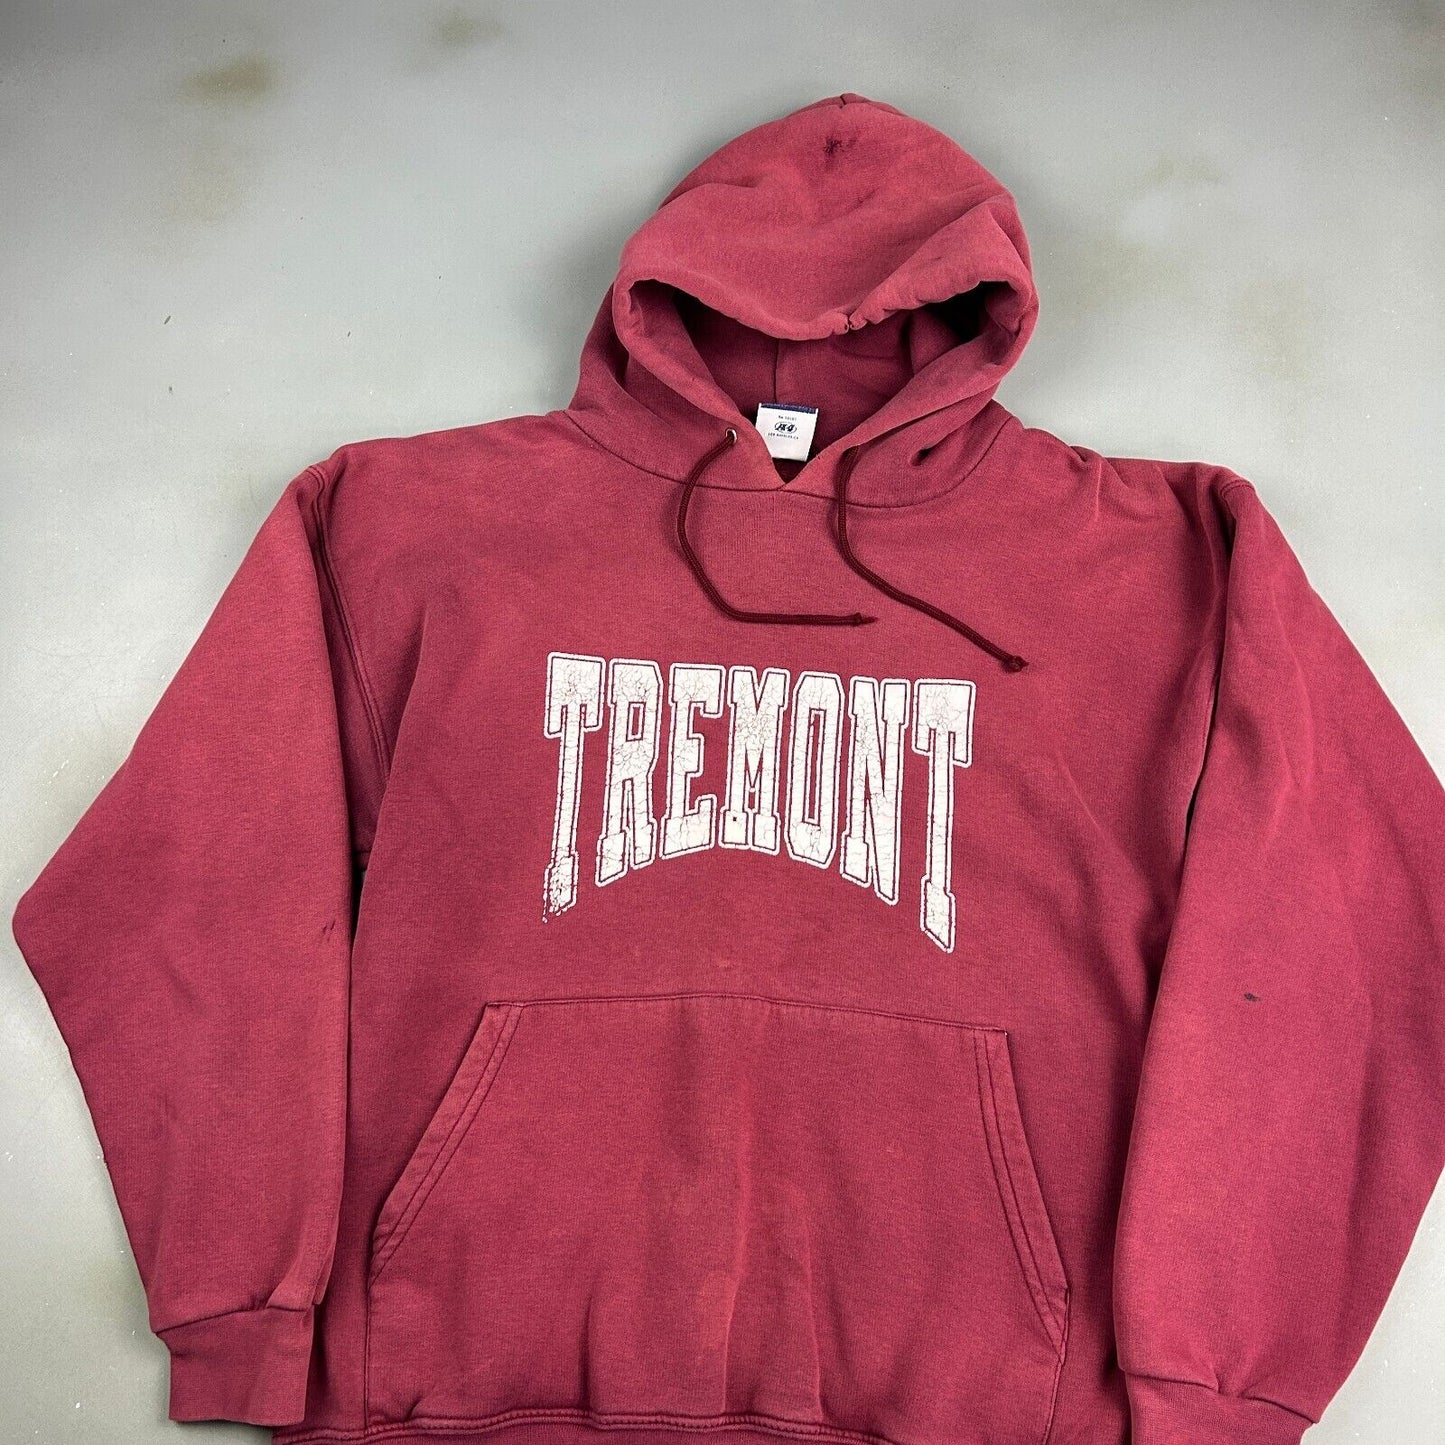 VINTAGE 90s Tremont Faded Red Hoodie Sweater sz Large Mens